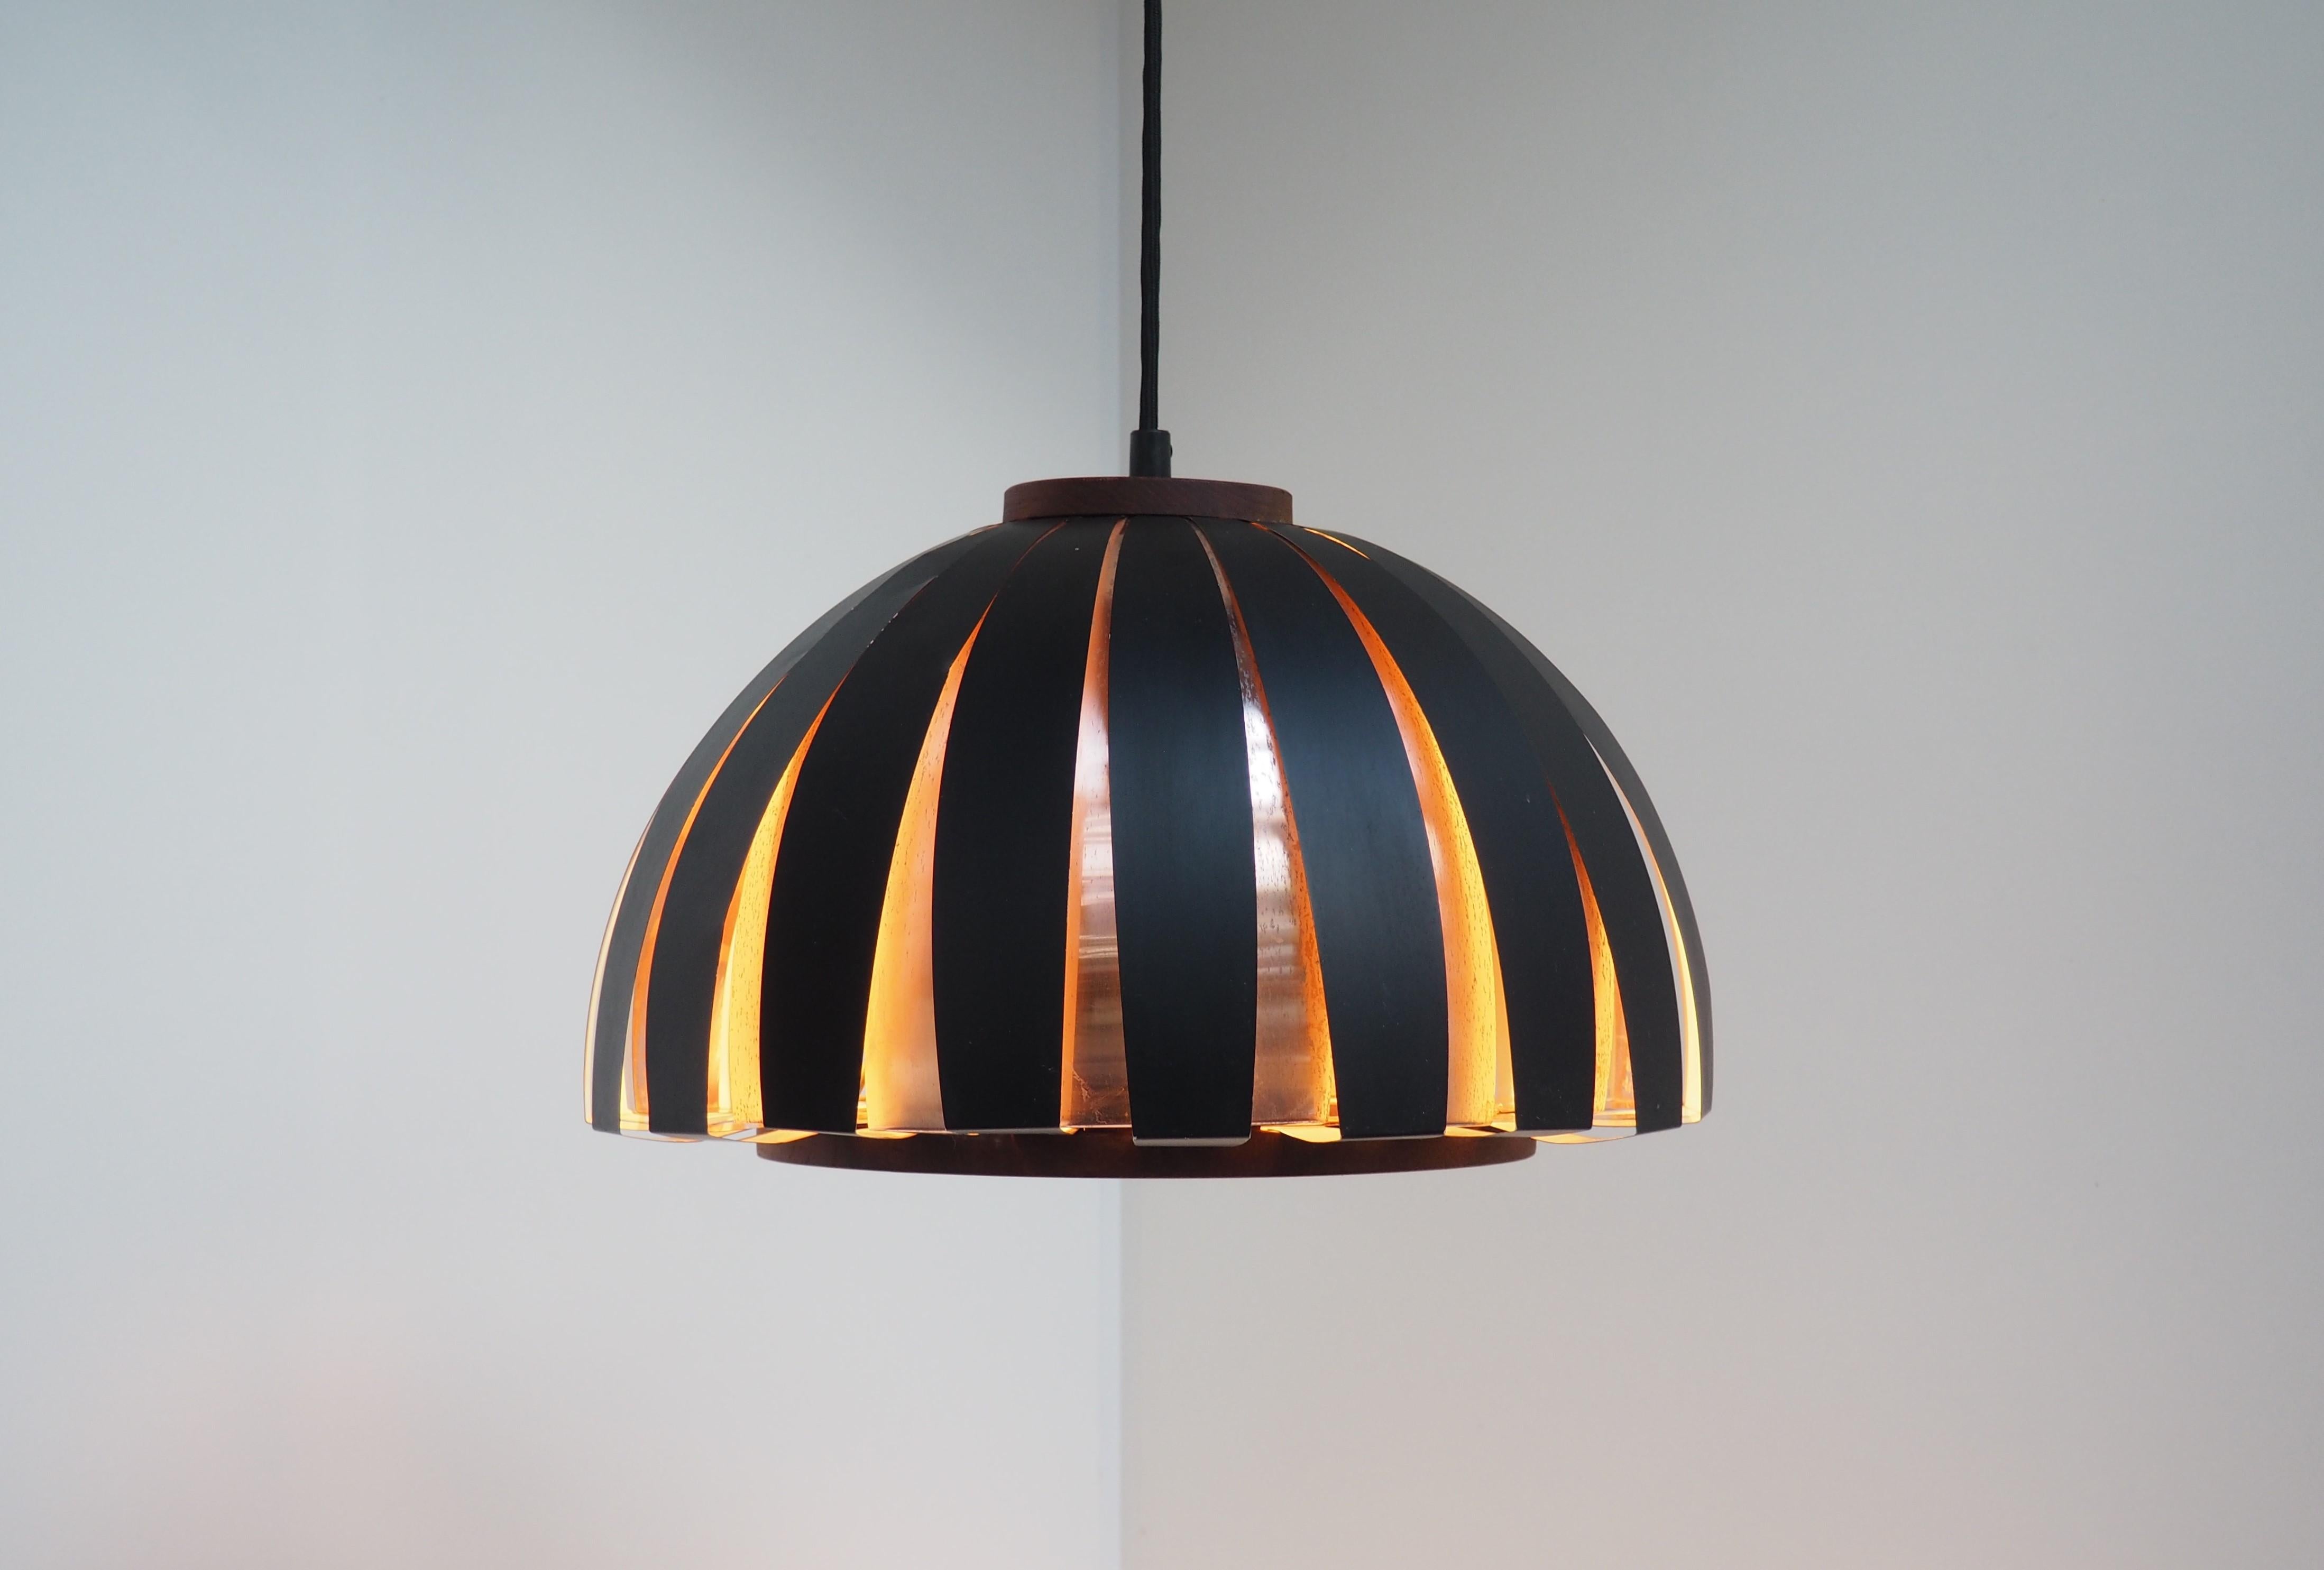 Fiesta pendant made by the Danish designer Svend Aage Holm Sørensen in the 1960s. The pendant is manufactured in solid copper and black painted metal slats and it has a thick decorative teak plate at the top and a teak wooden ring at the